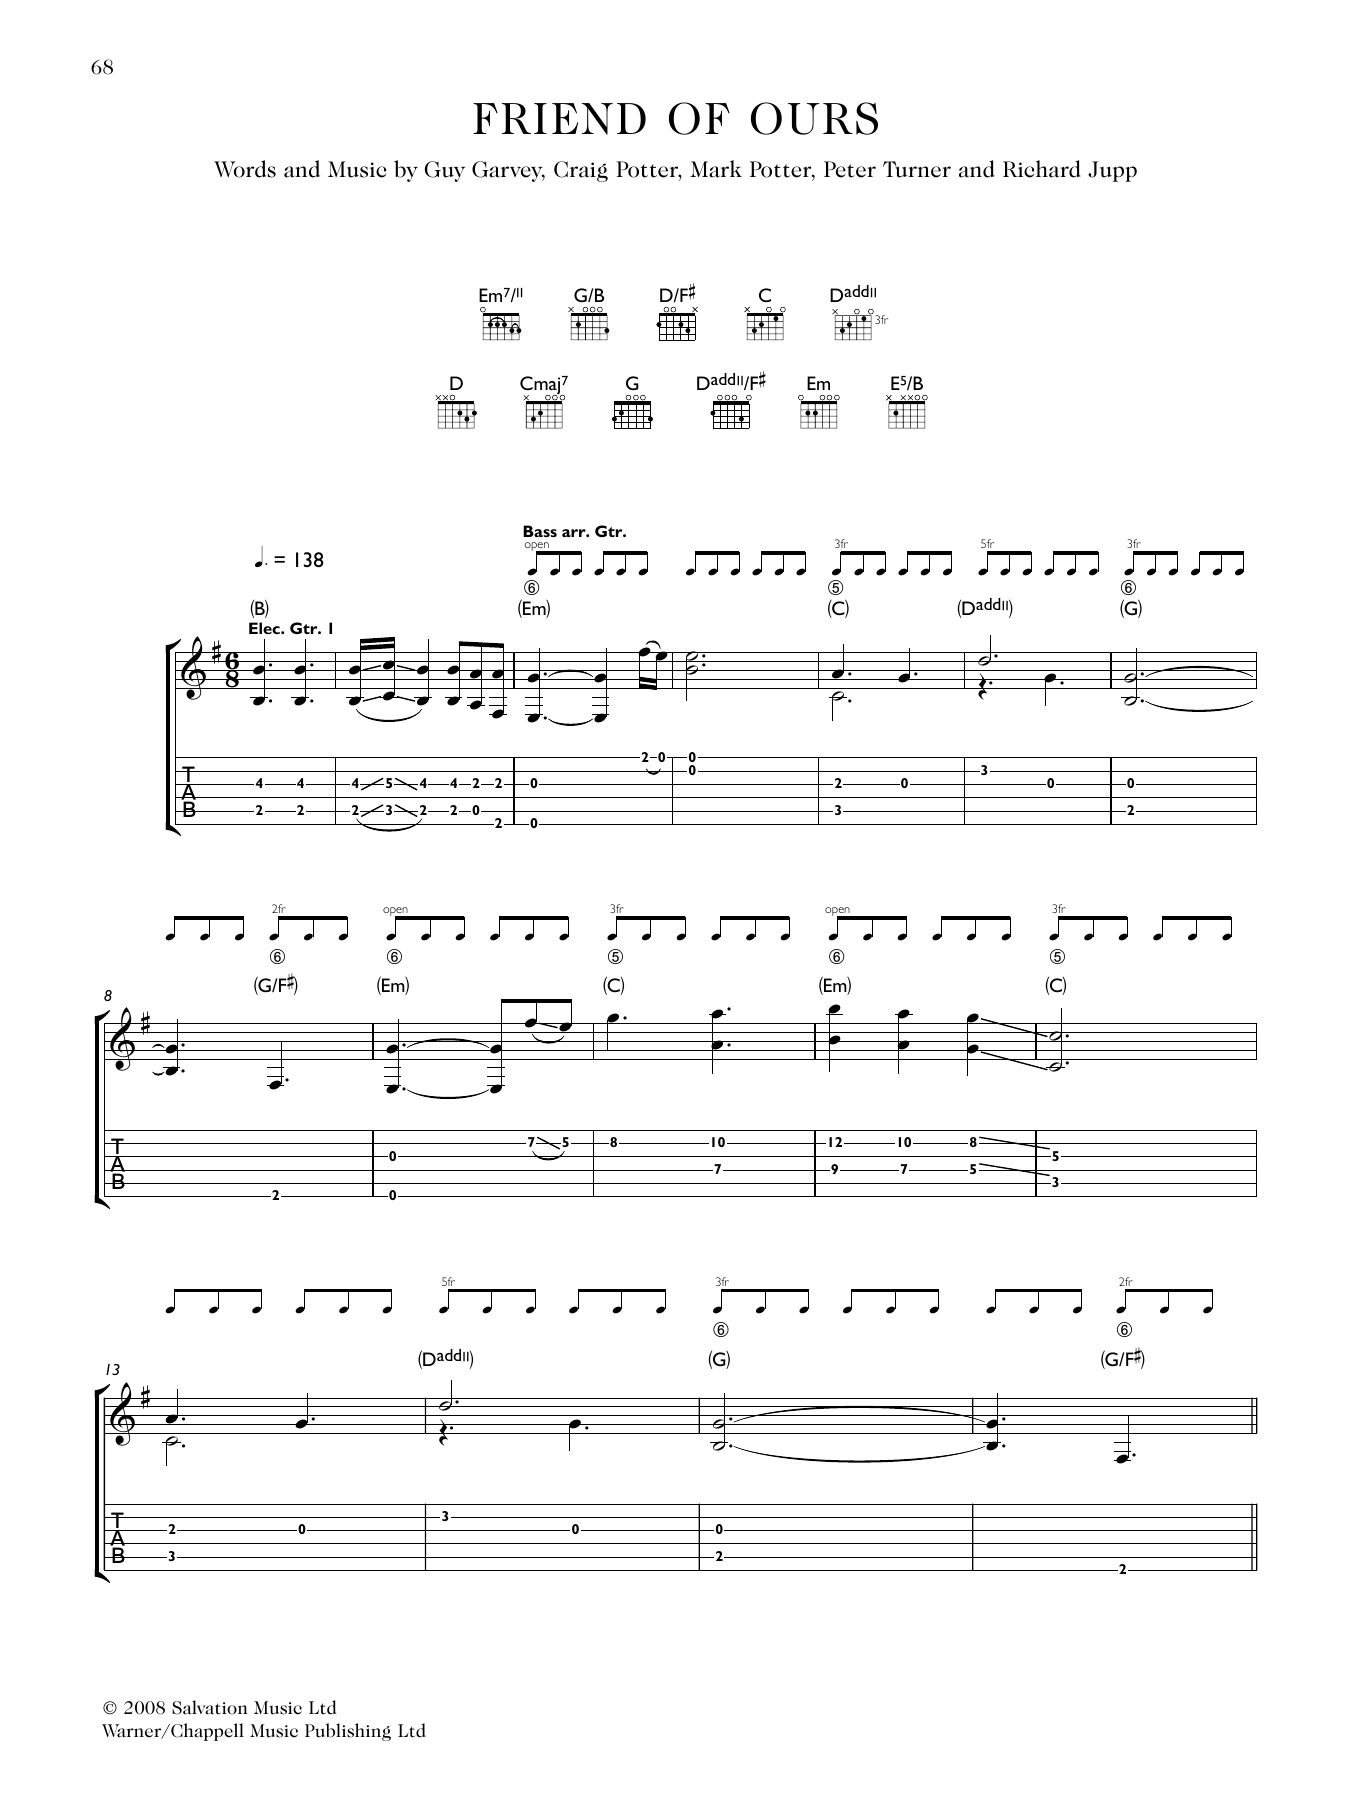 Download Elbow Friend Of Ours Sheet Music